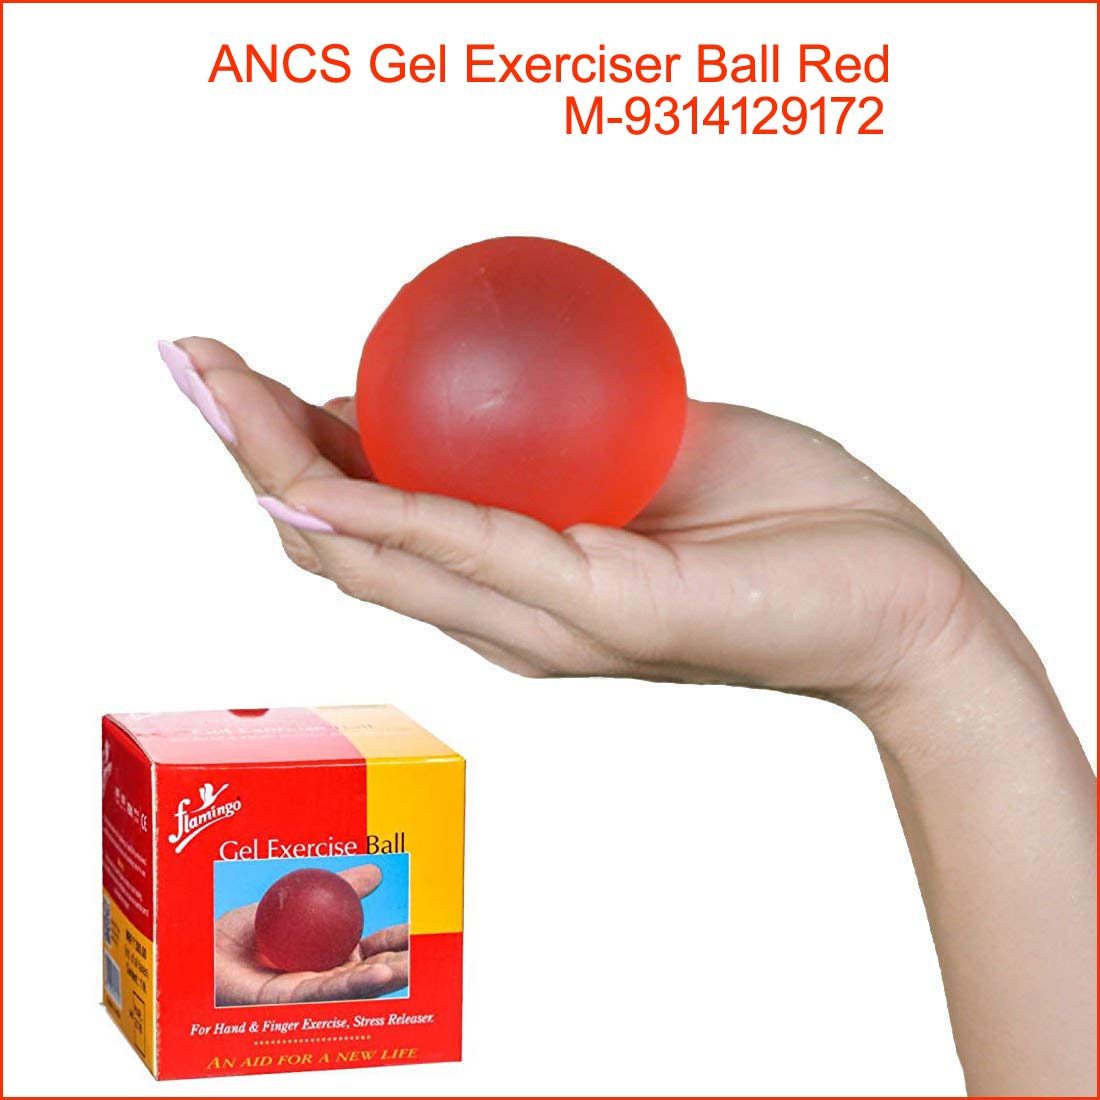 ANCS hand exercise ball gel 